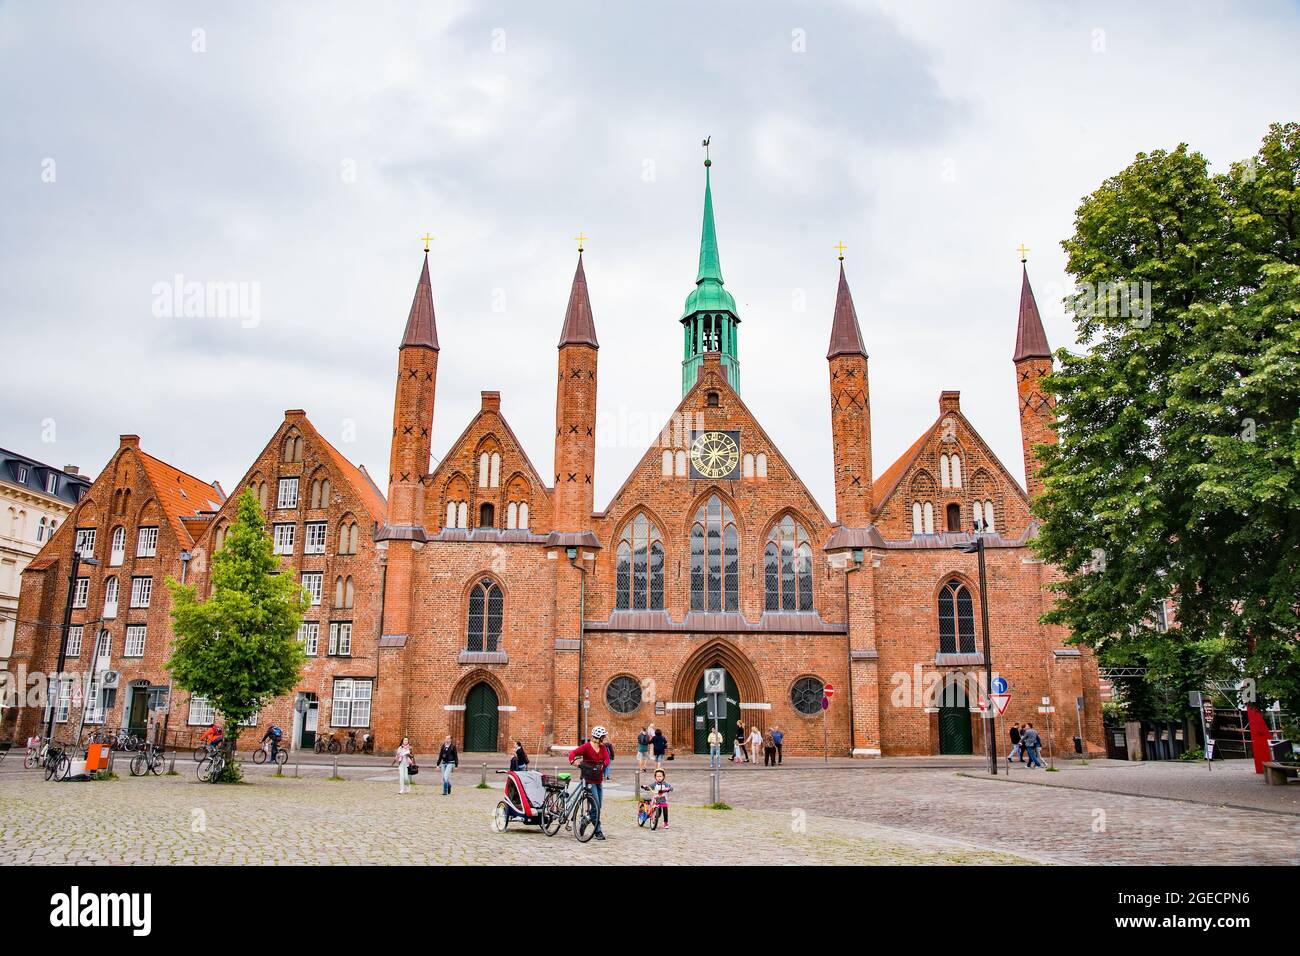 Heiligen Geist Hospital was built in the 13th century and the building still contains a home for the elderly within its walls. Taken in Lubeck, German Stock Photo